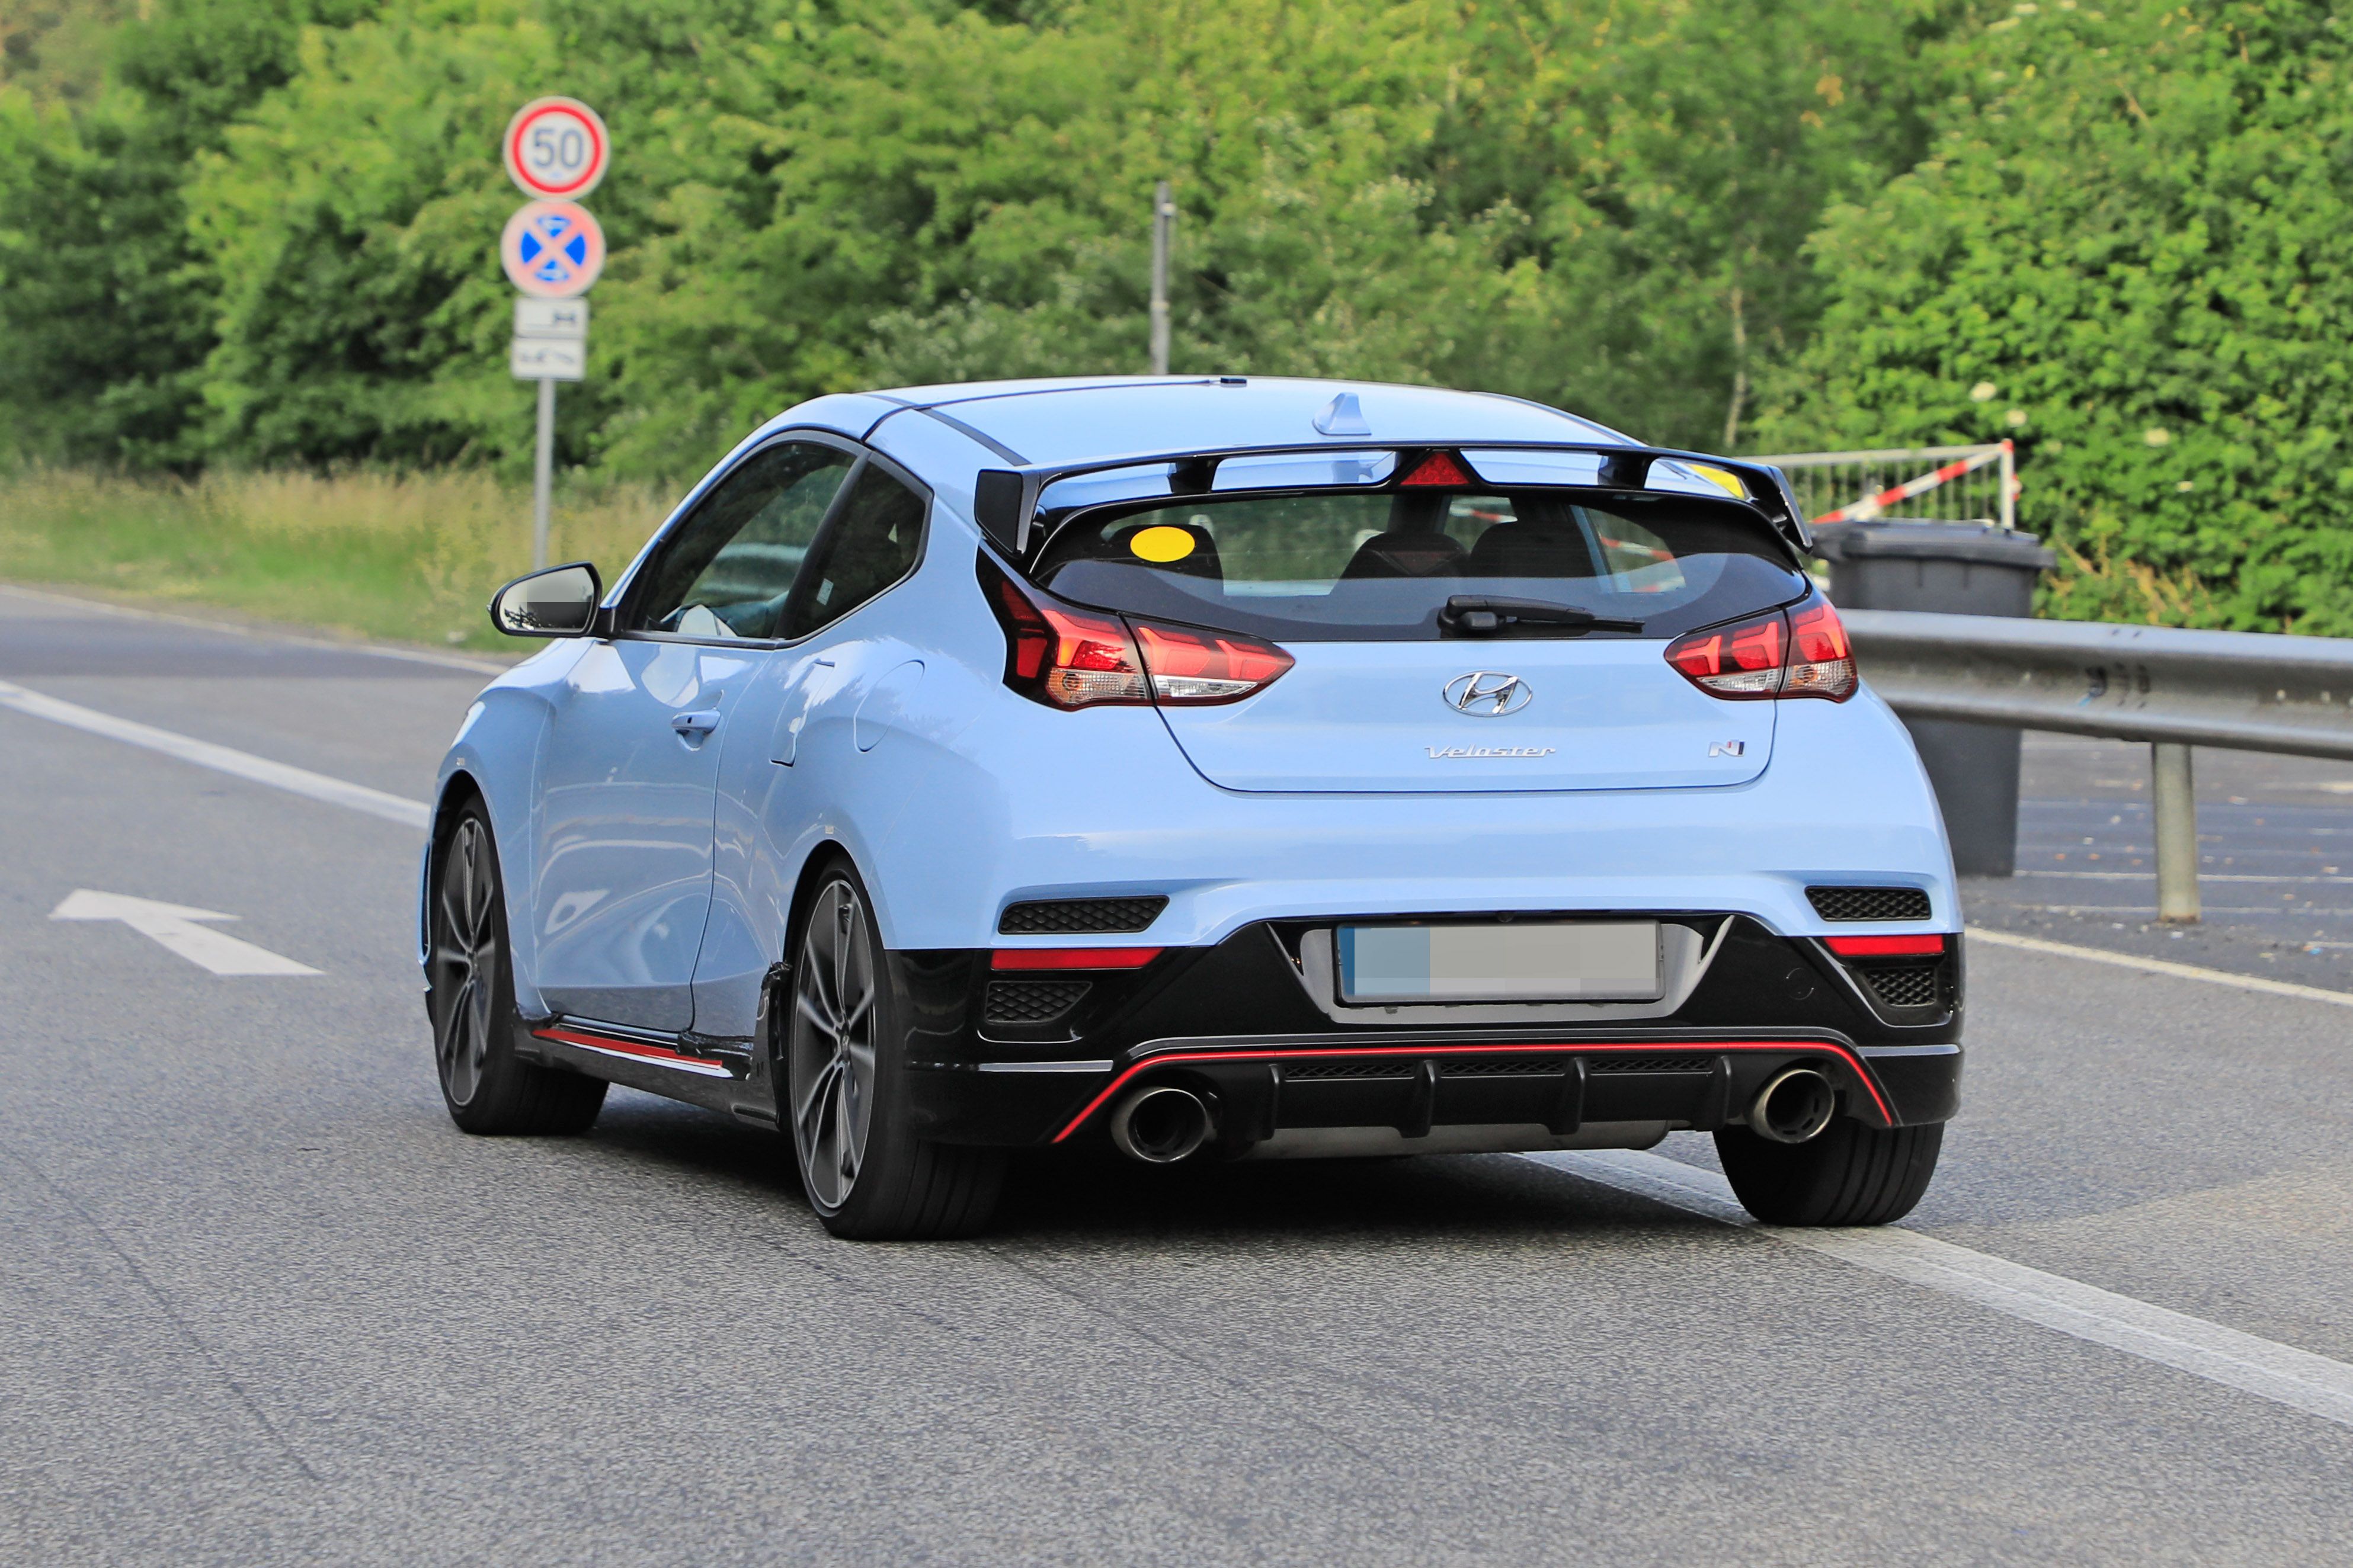 Spy Shots An Early Look at the 2023 Hyundai Veloster N Hybrid